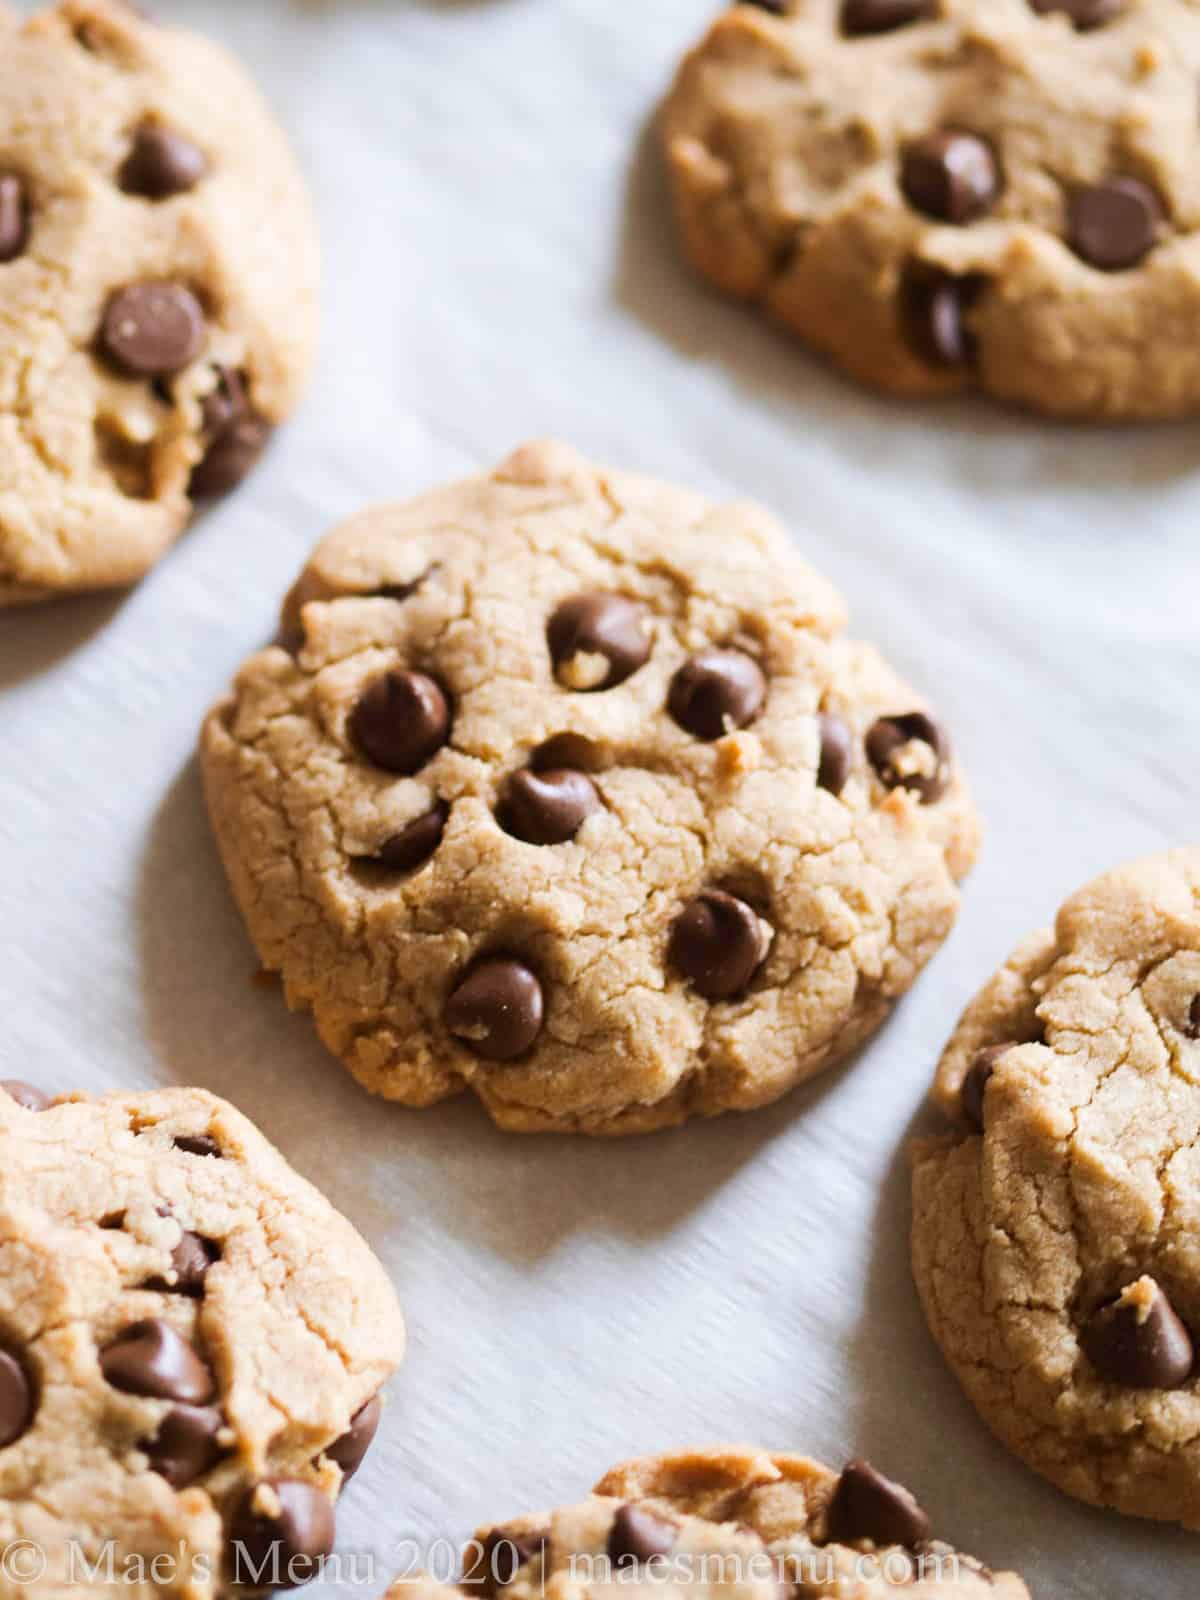 An overhead shot of chocolate chip cookies on a white parchment paper sheet